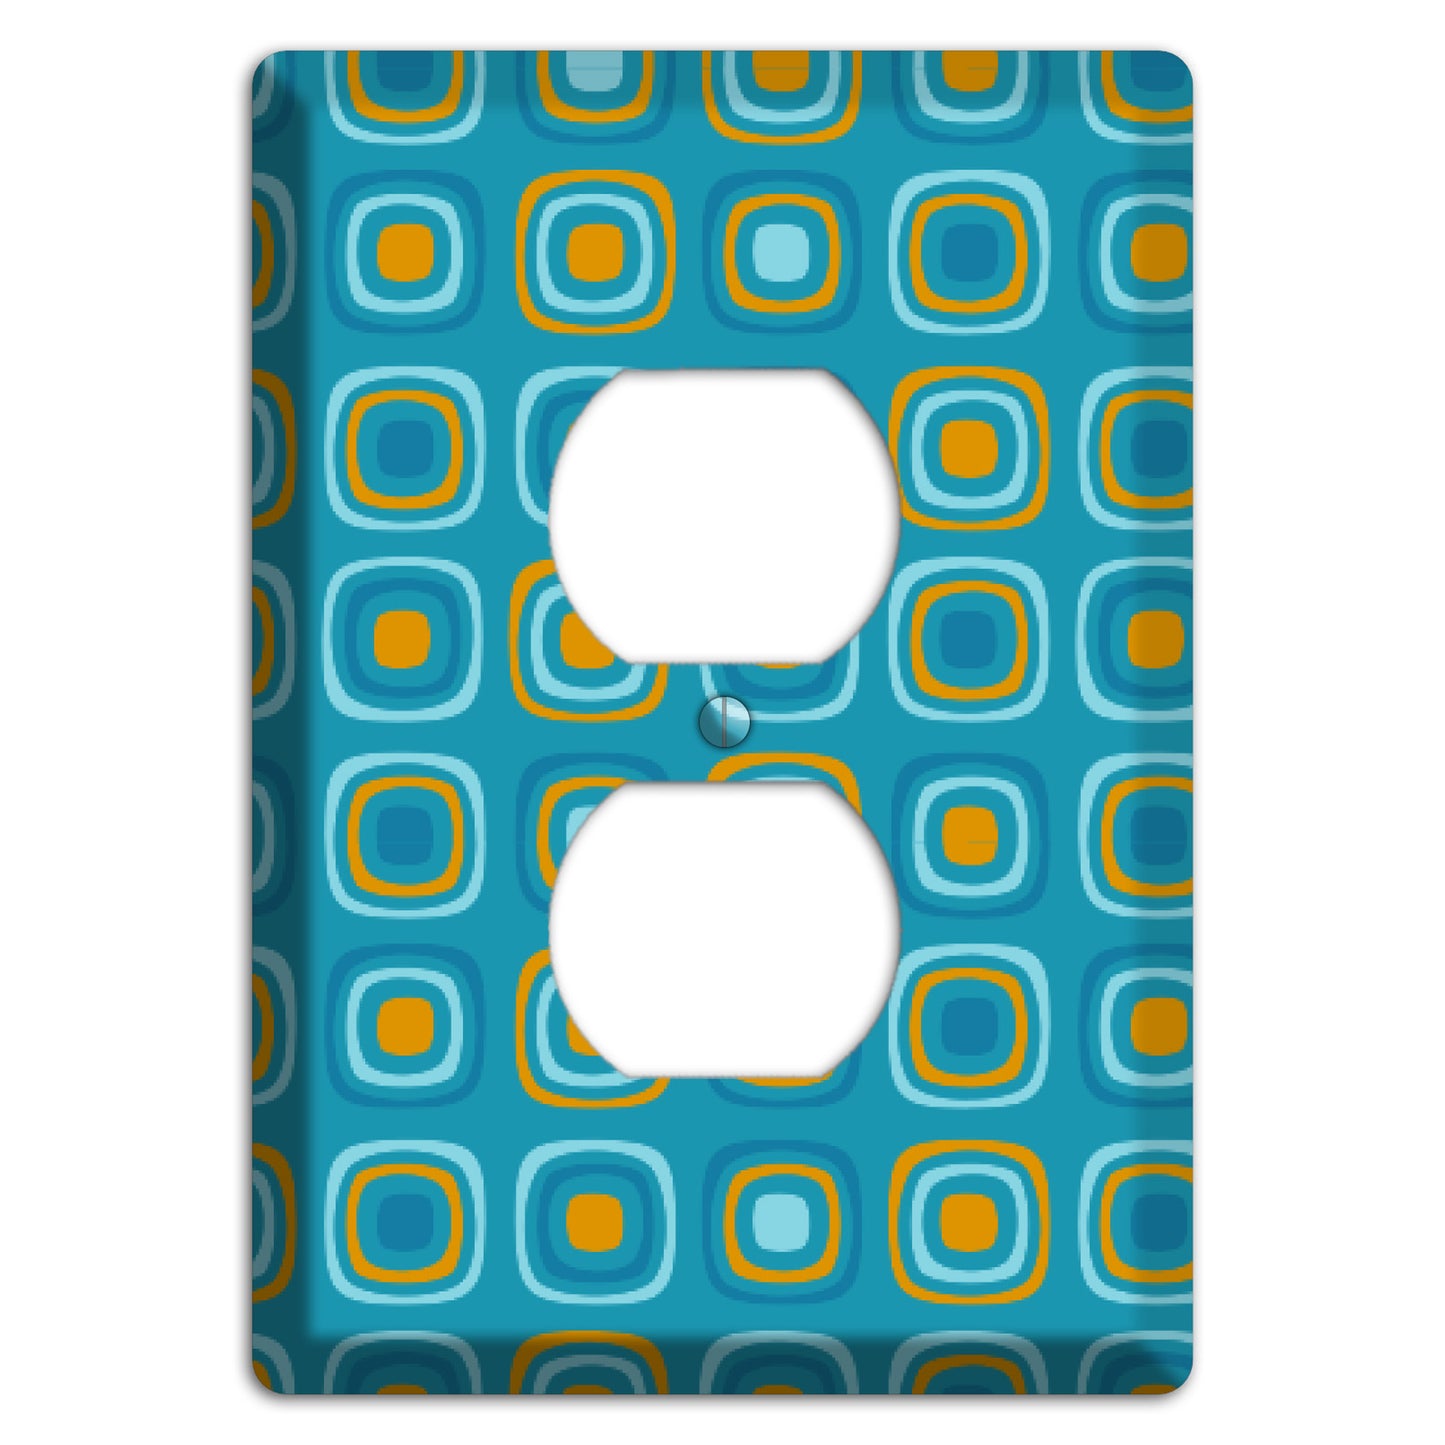 Teal and Mustard Rounded Squares Duplex Outlet Wallplate